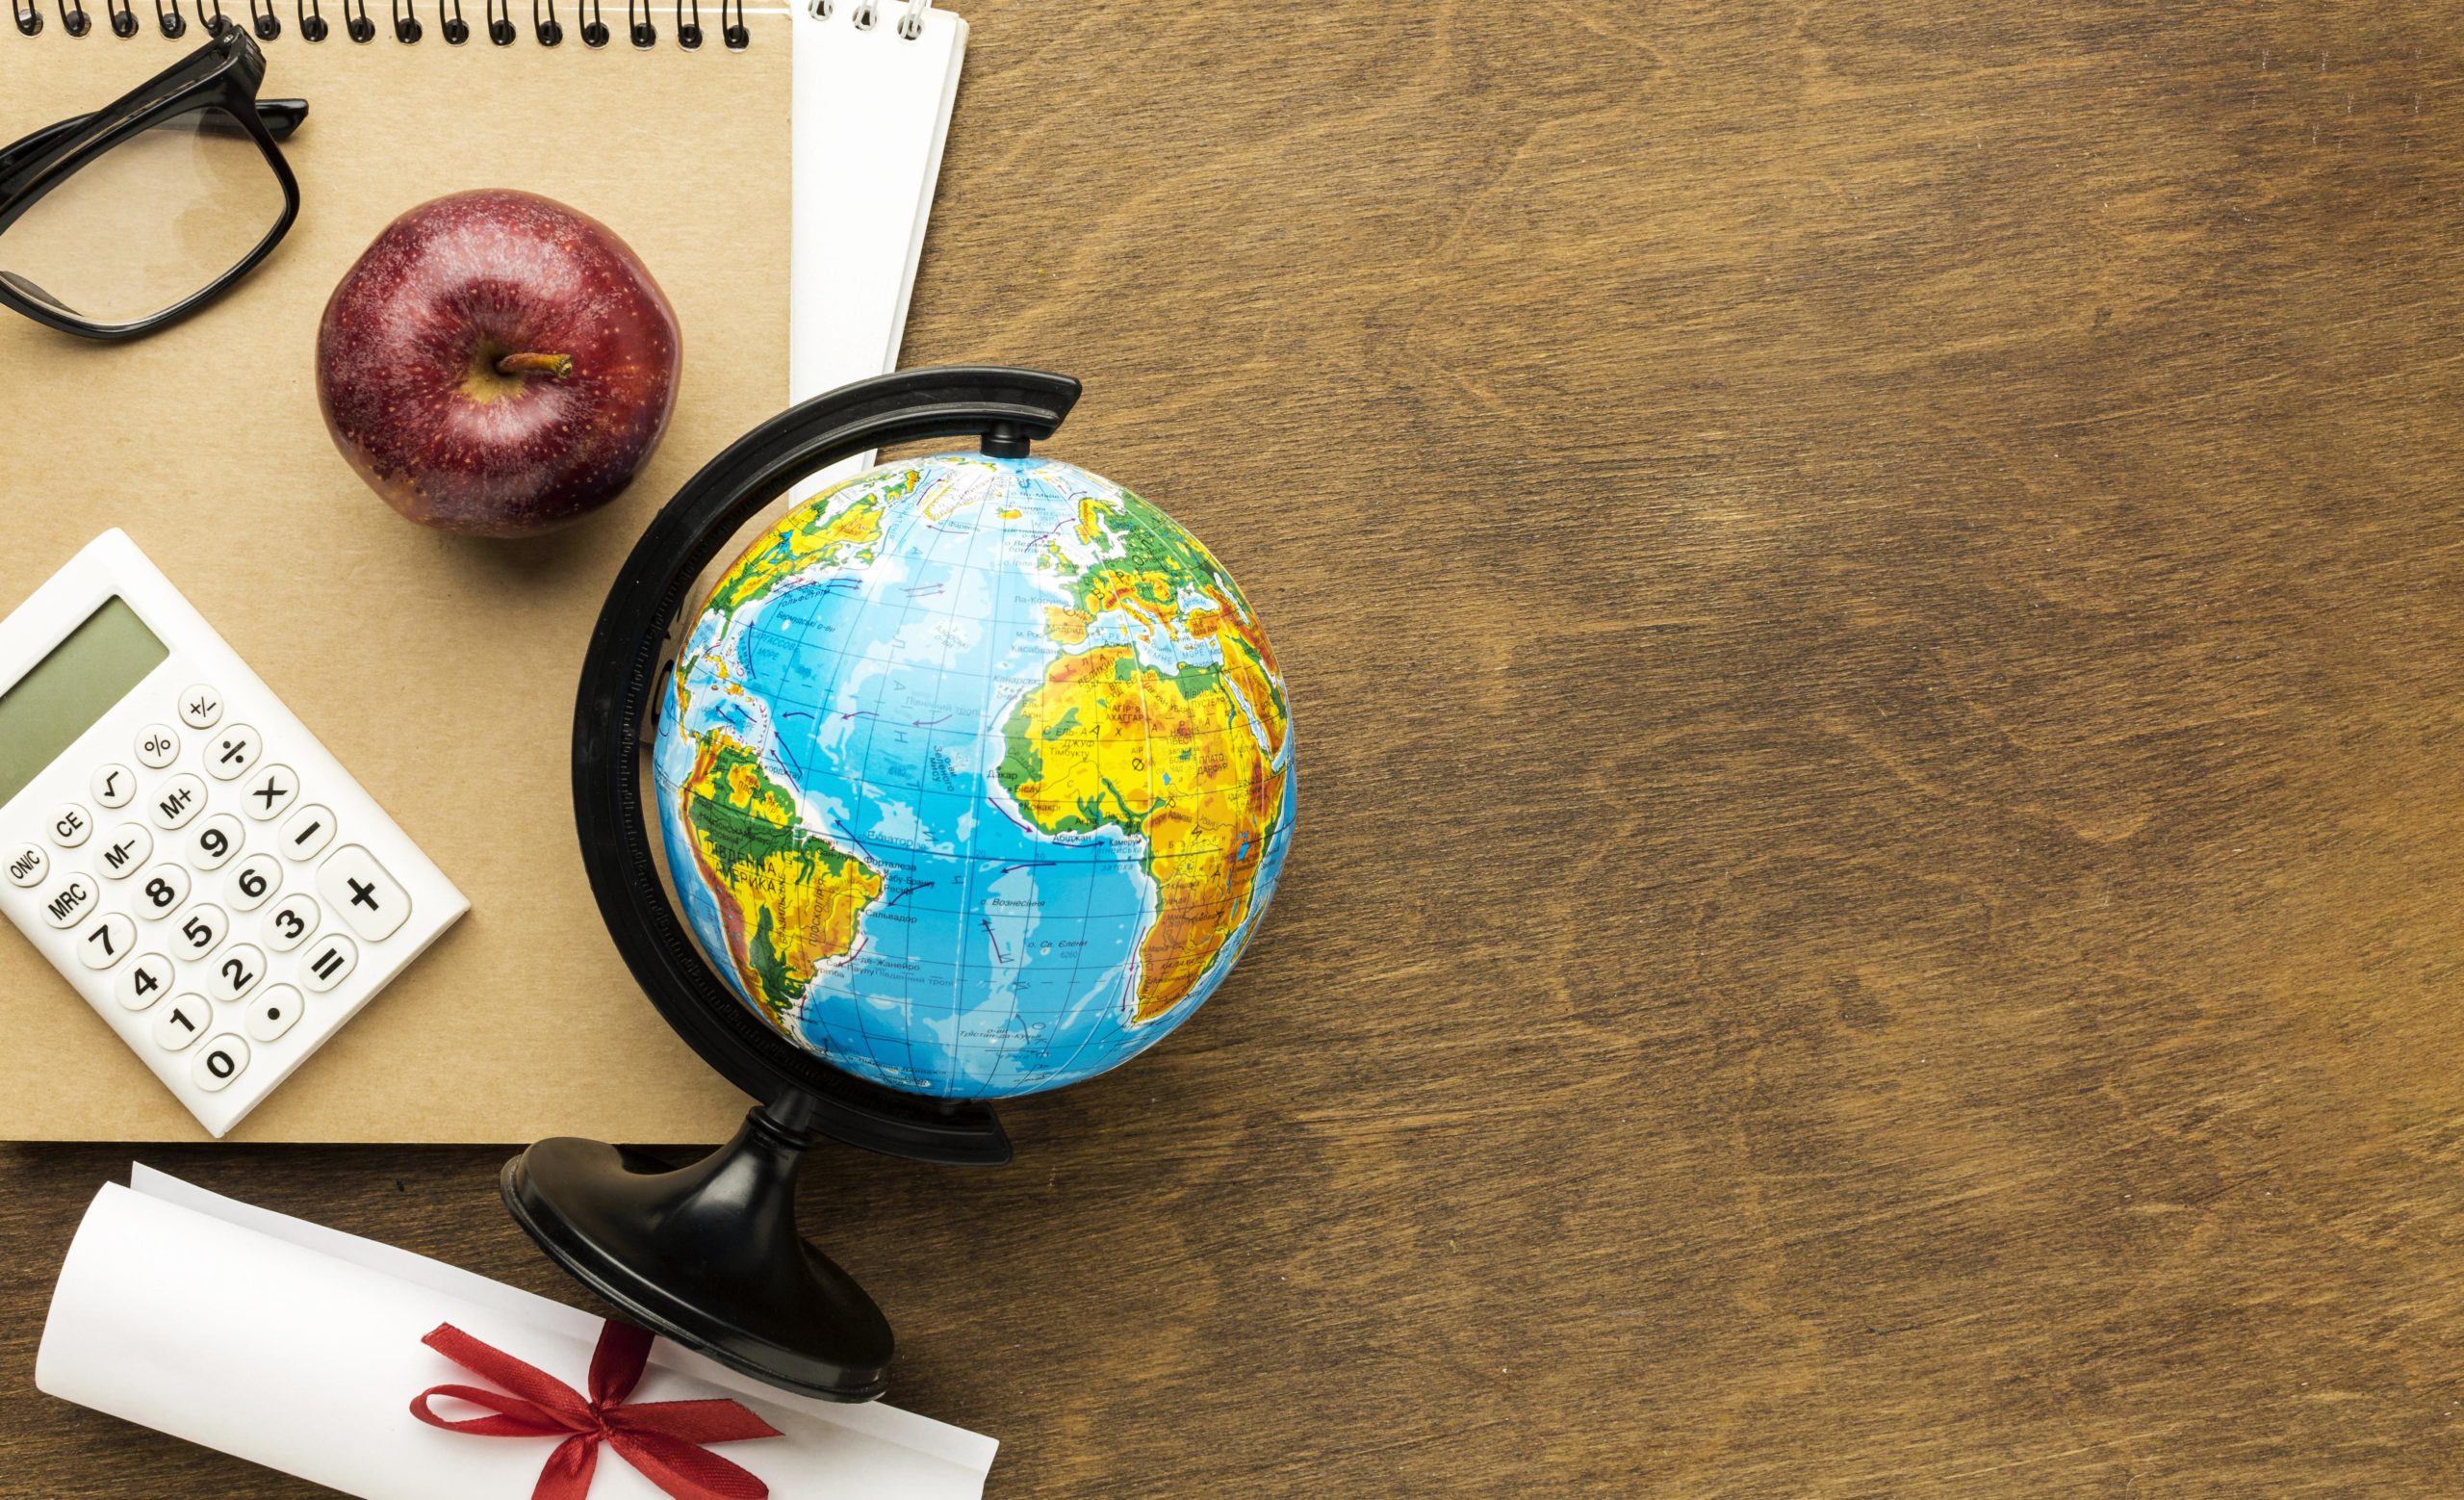 "Items on a wooden desk including a globe, calculator, red apple, glasses, and a notebook."